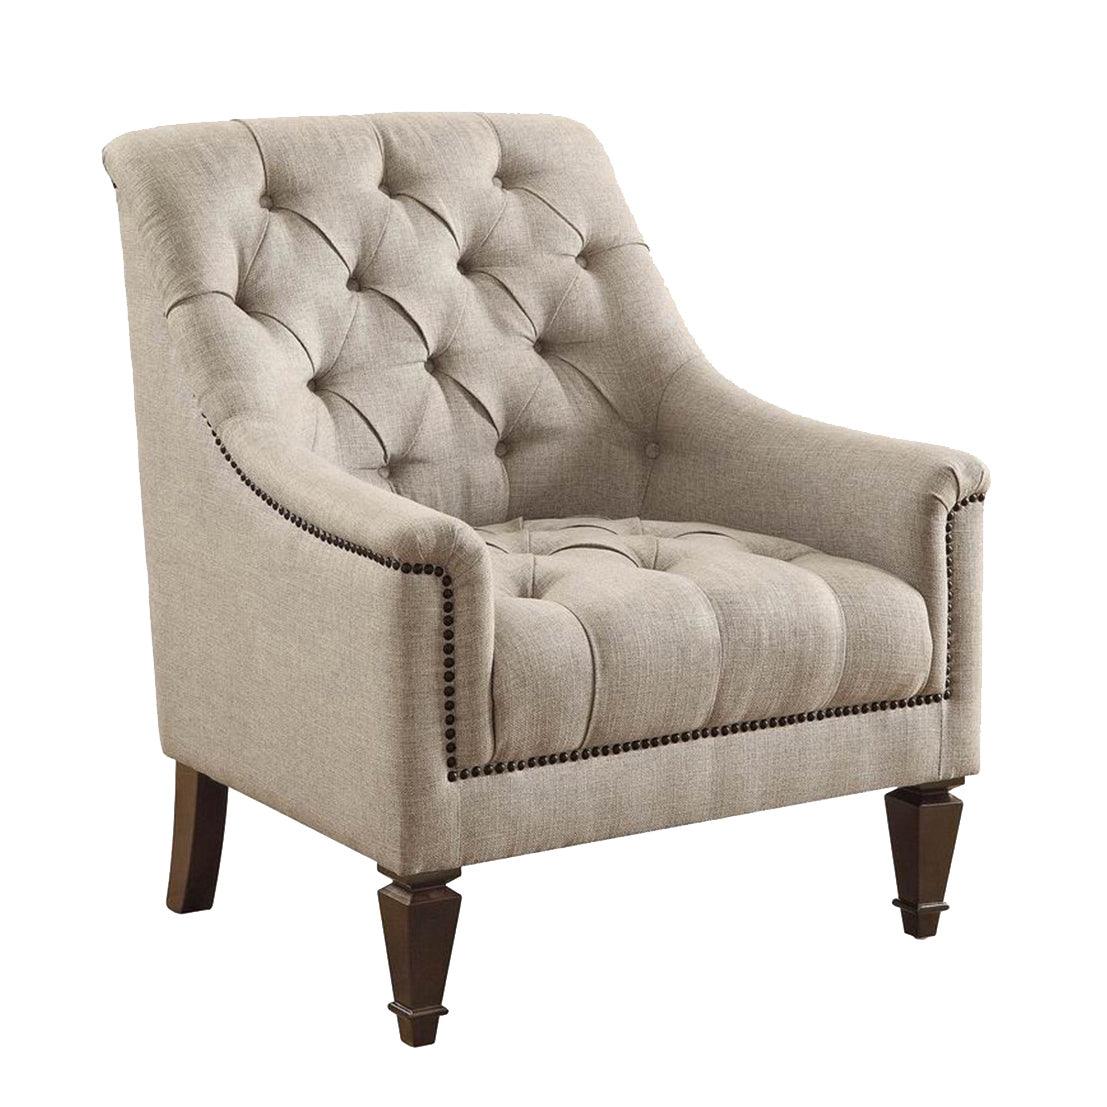 Avonlea Linen-like Upholstered Tufted Sofa, Loveseat and Chair Grey by Coaster Furniture Coaster Furniture